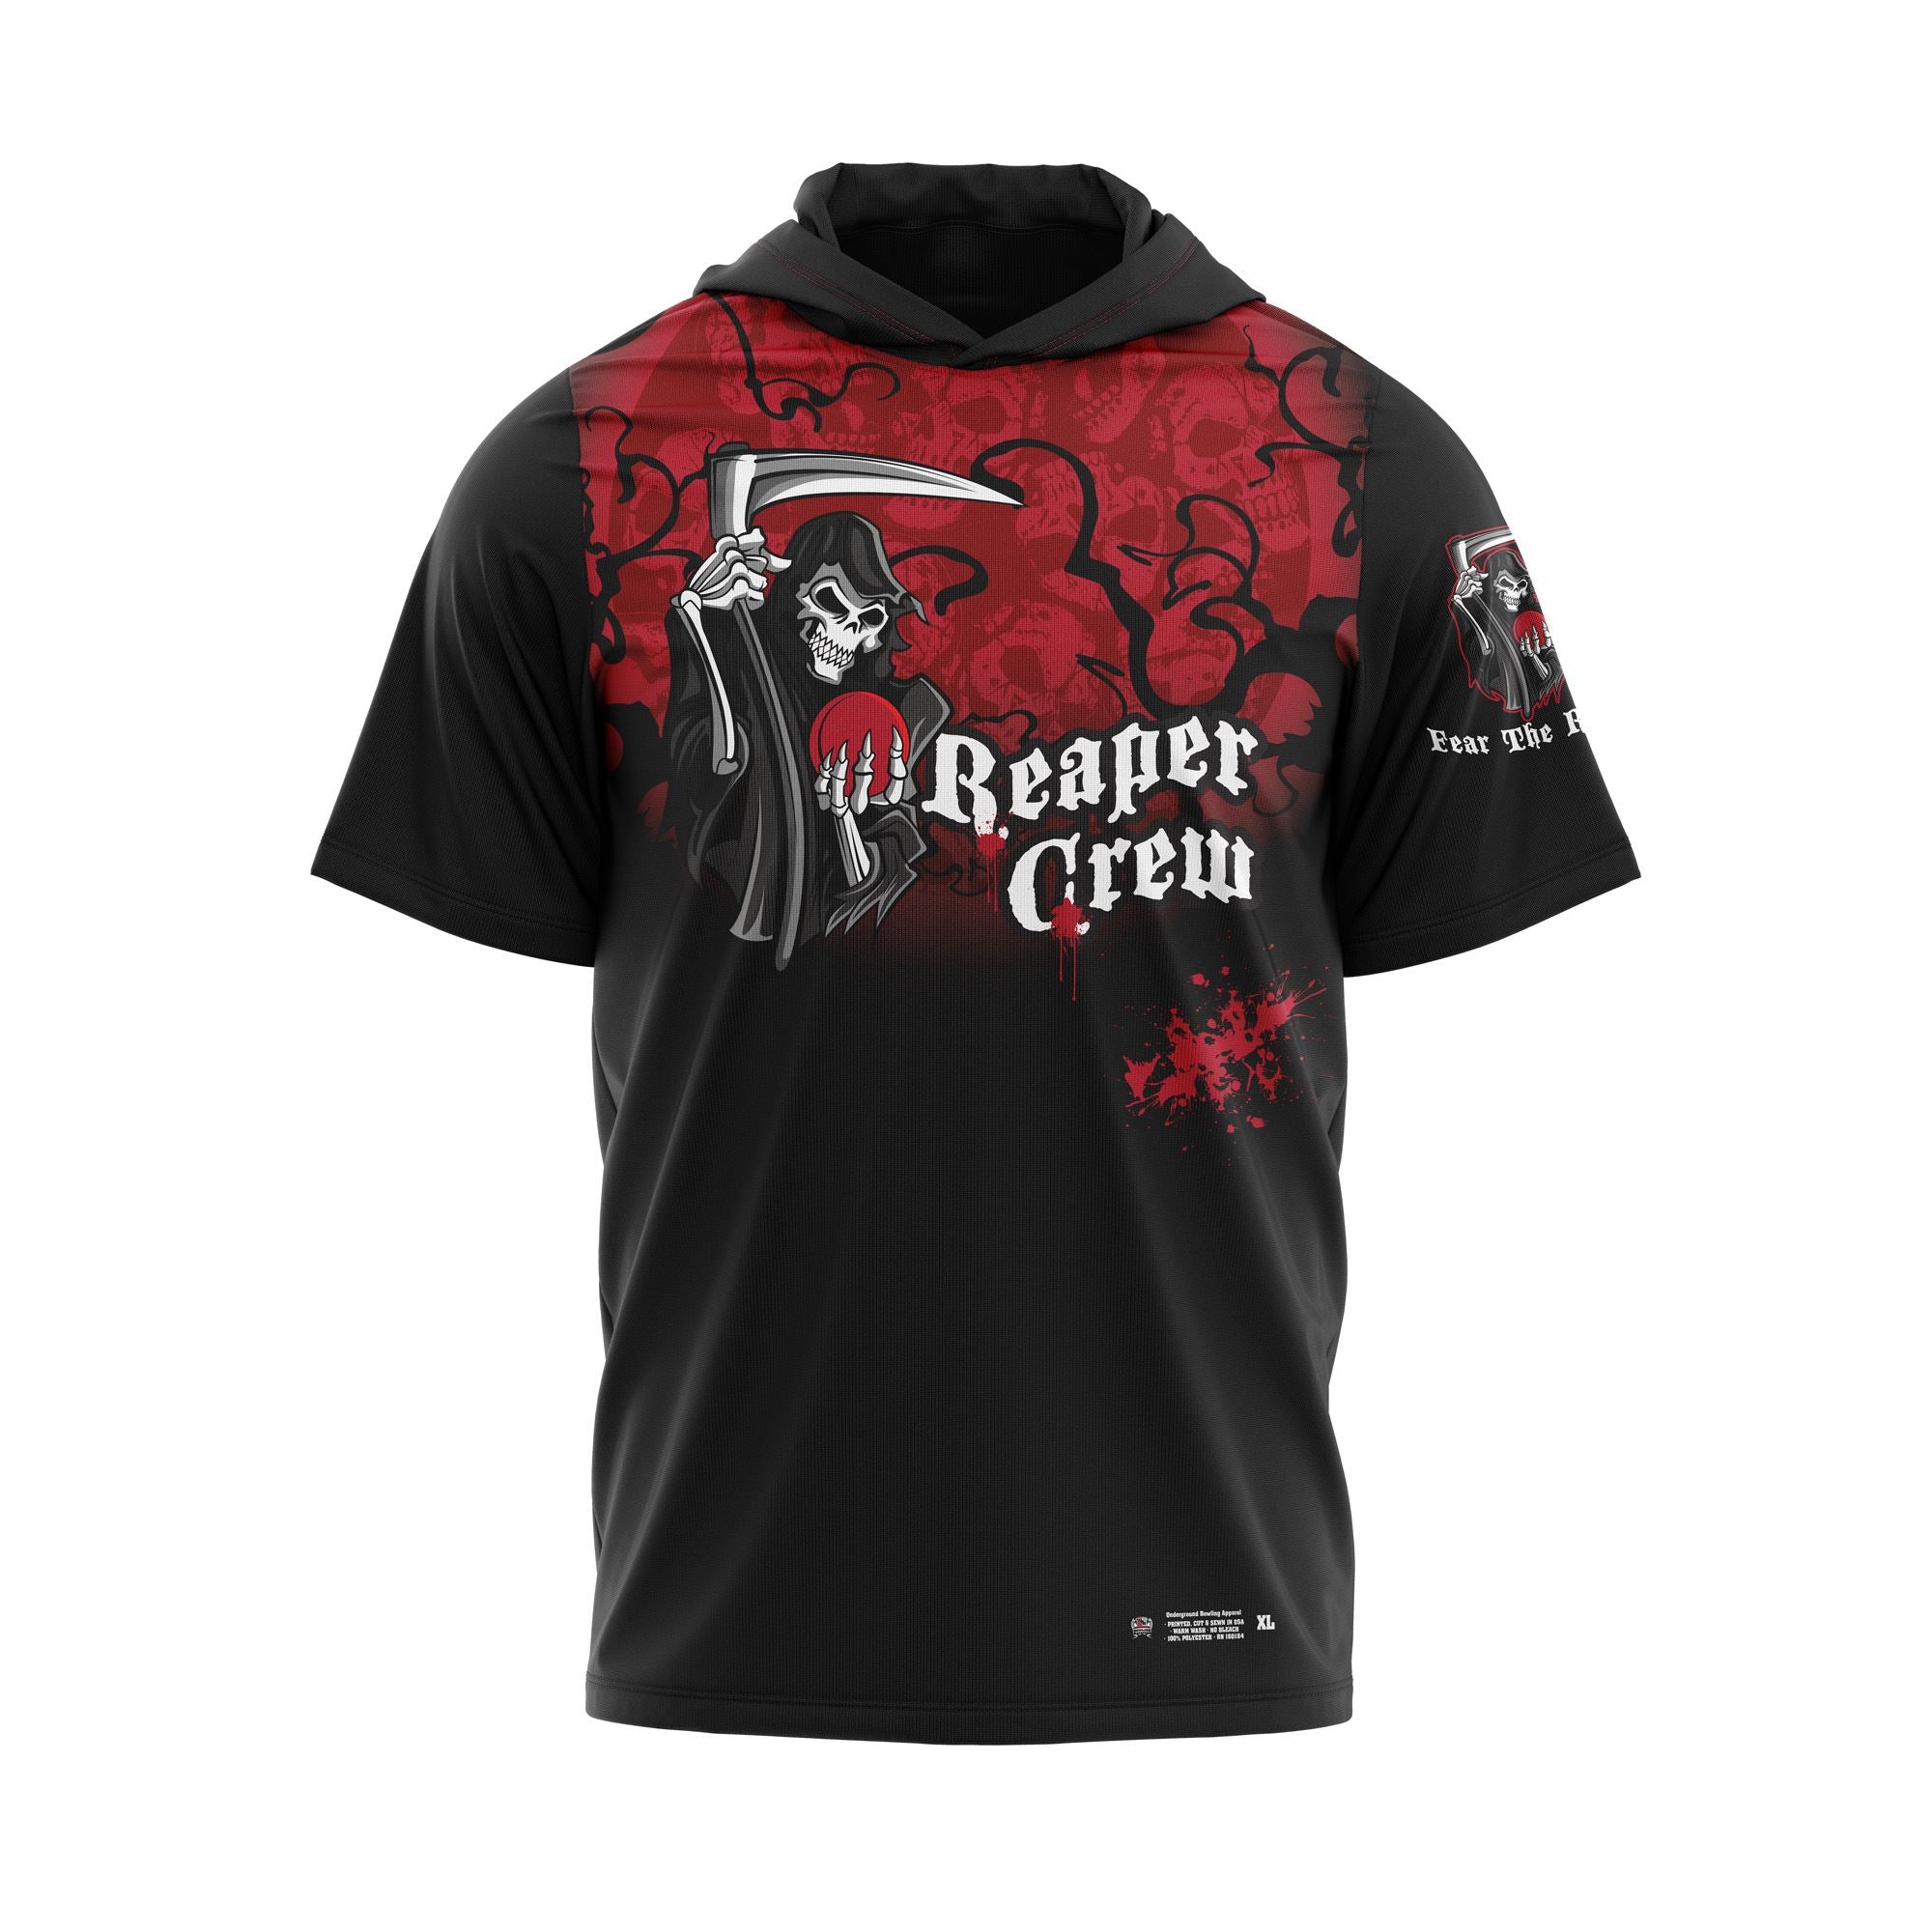 Reaper Crew Red Jersey